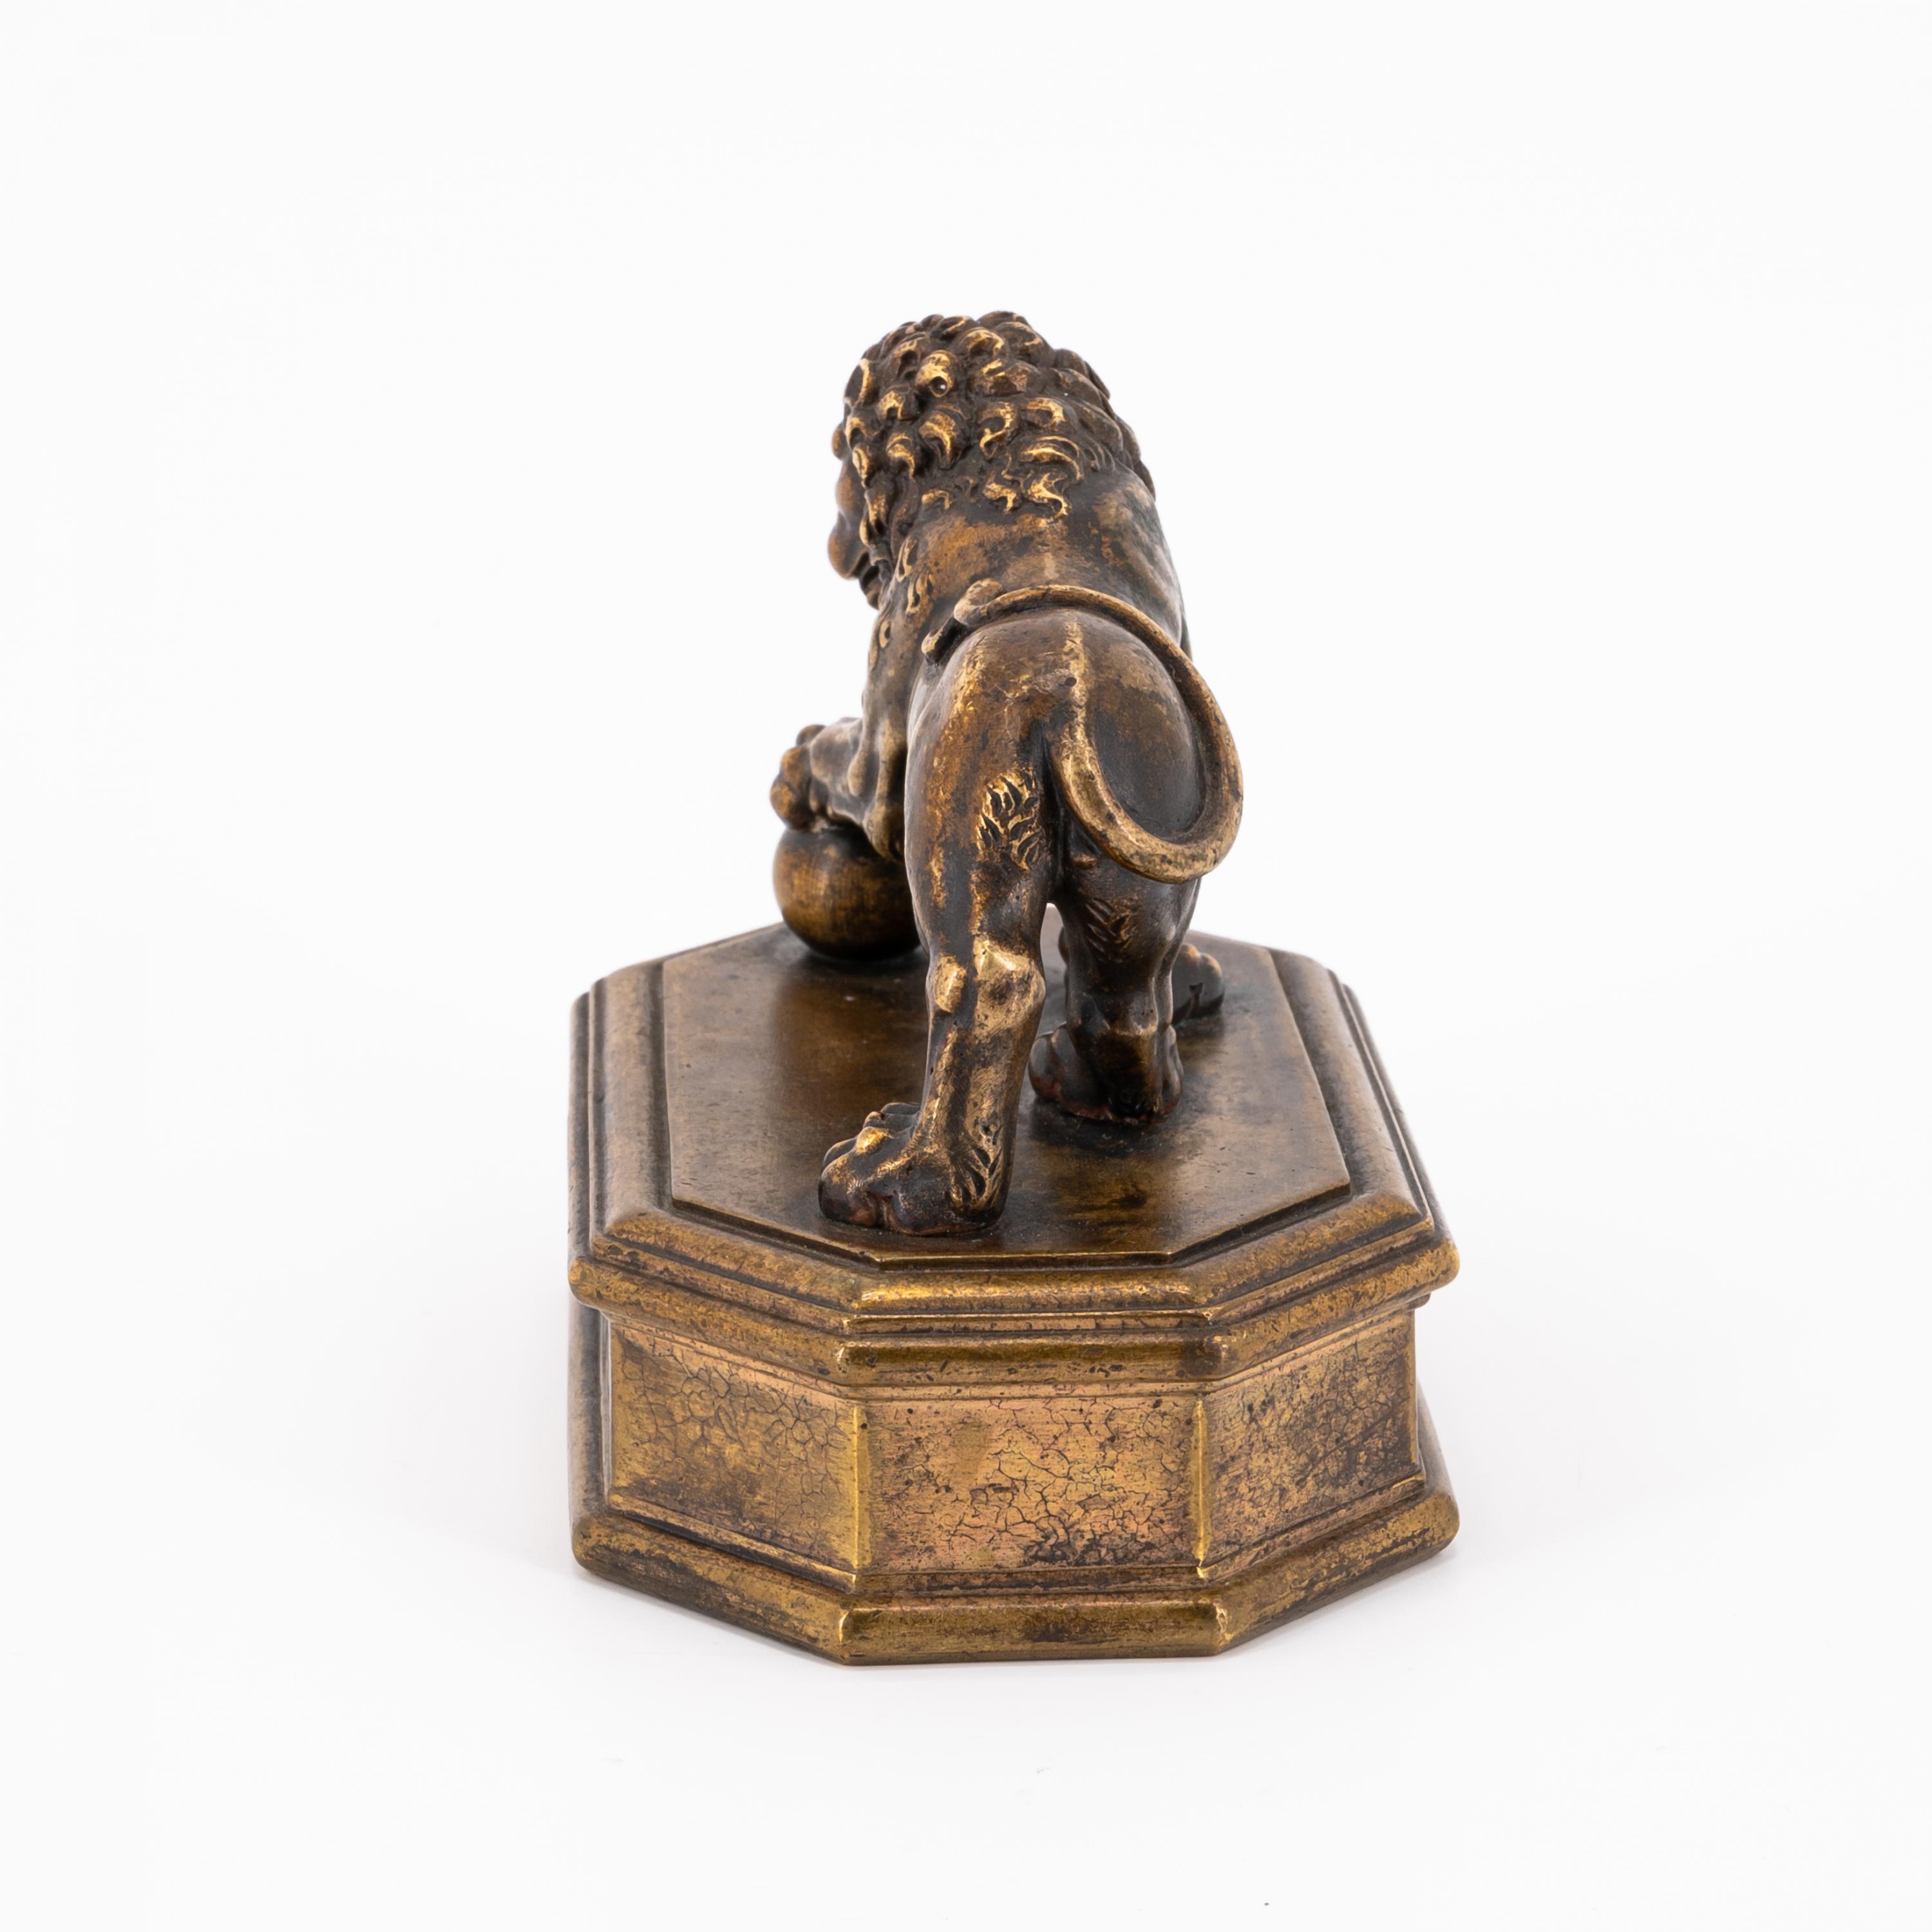 SMALL BRONZE SCULPTURE OF A LION ON A PEDESTAL - Image 3 of 6